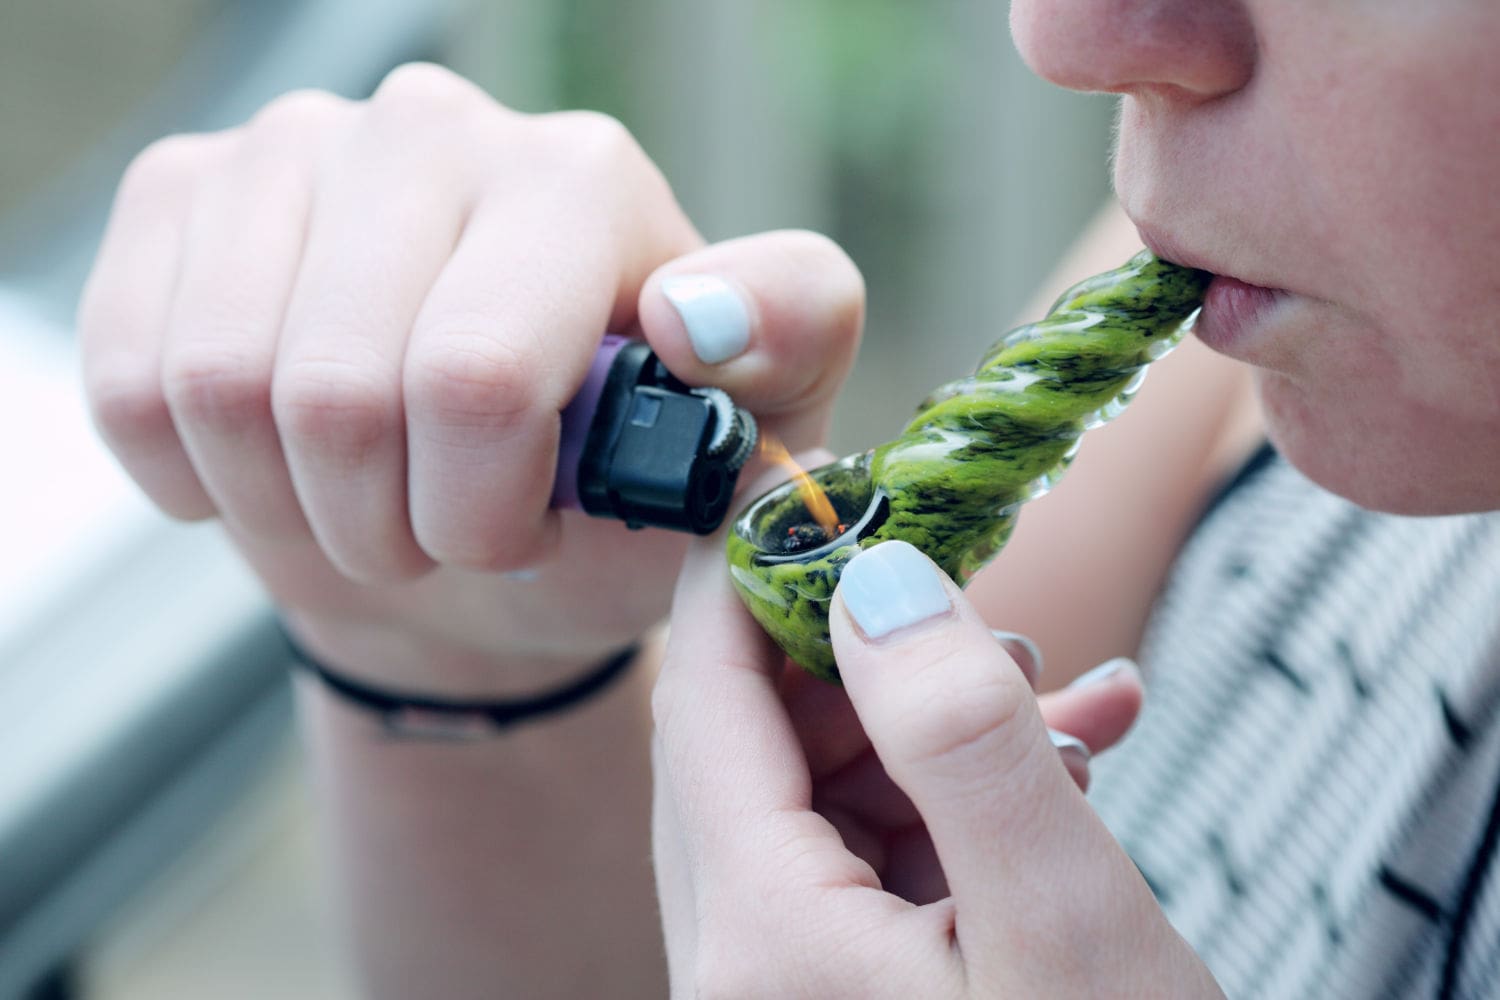 How to use a weed pipe